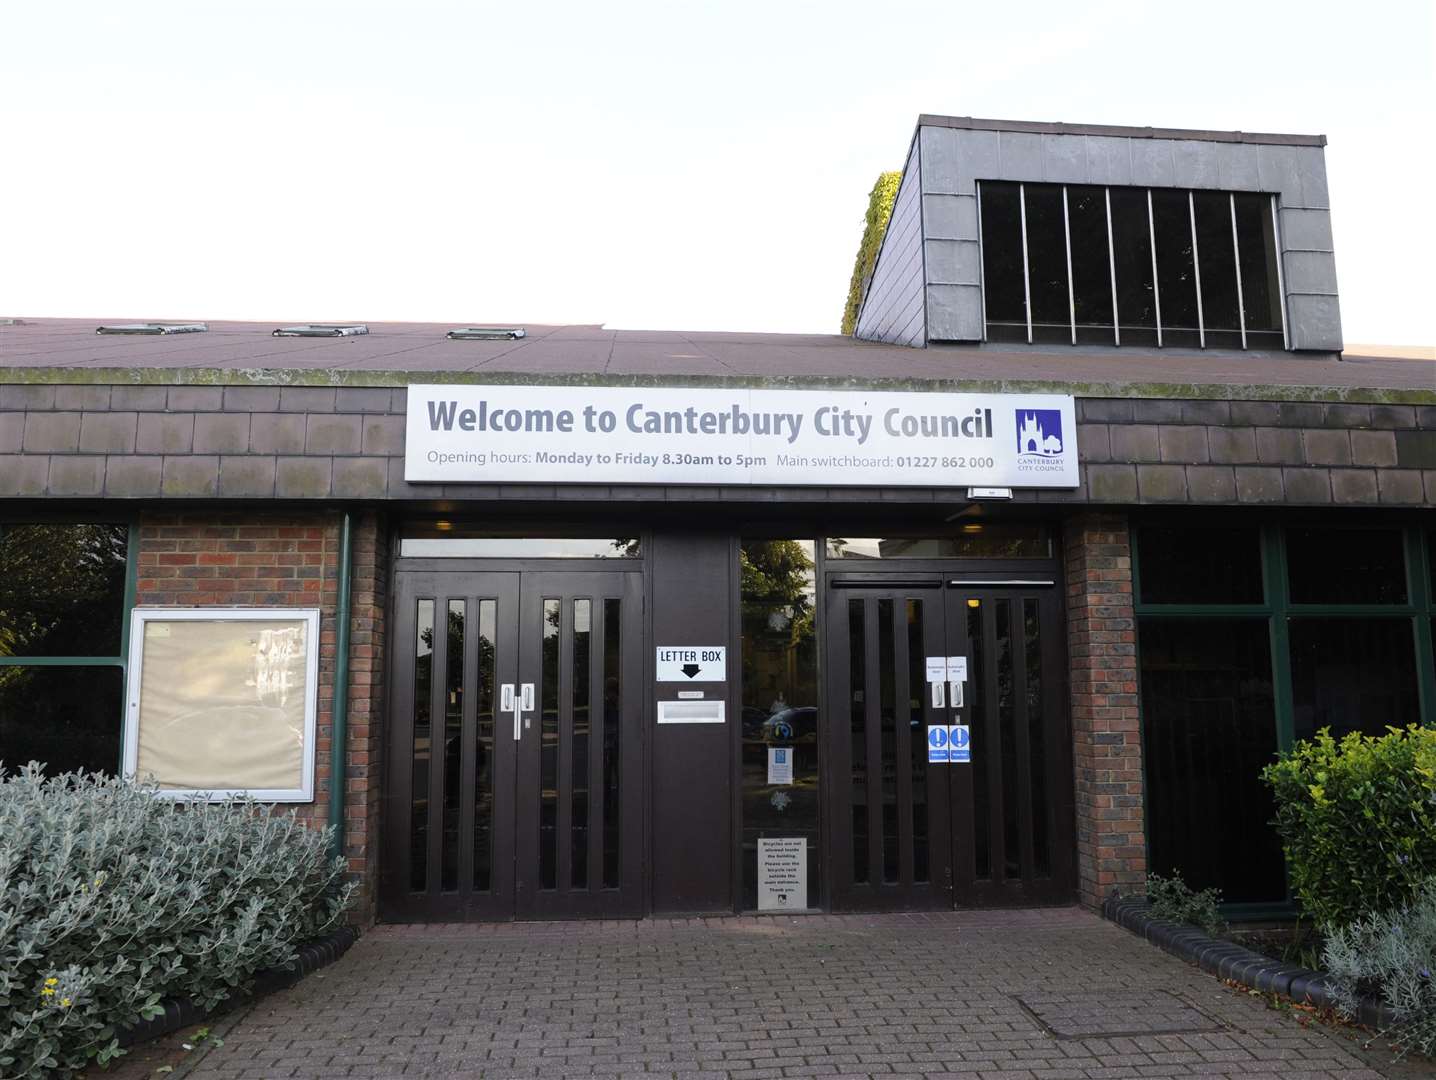 Canterbury City Council has had offices at Military Road since 1981